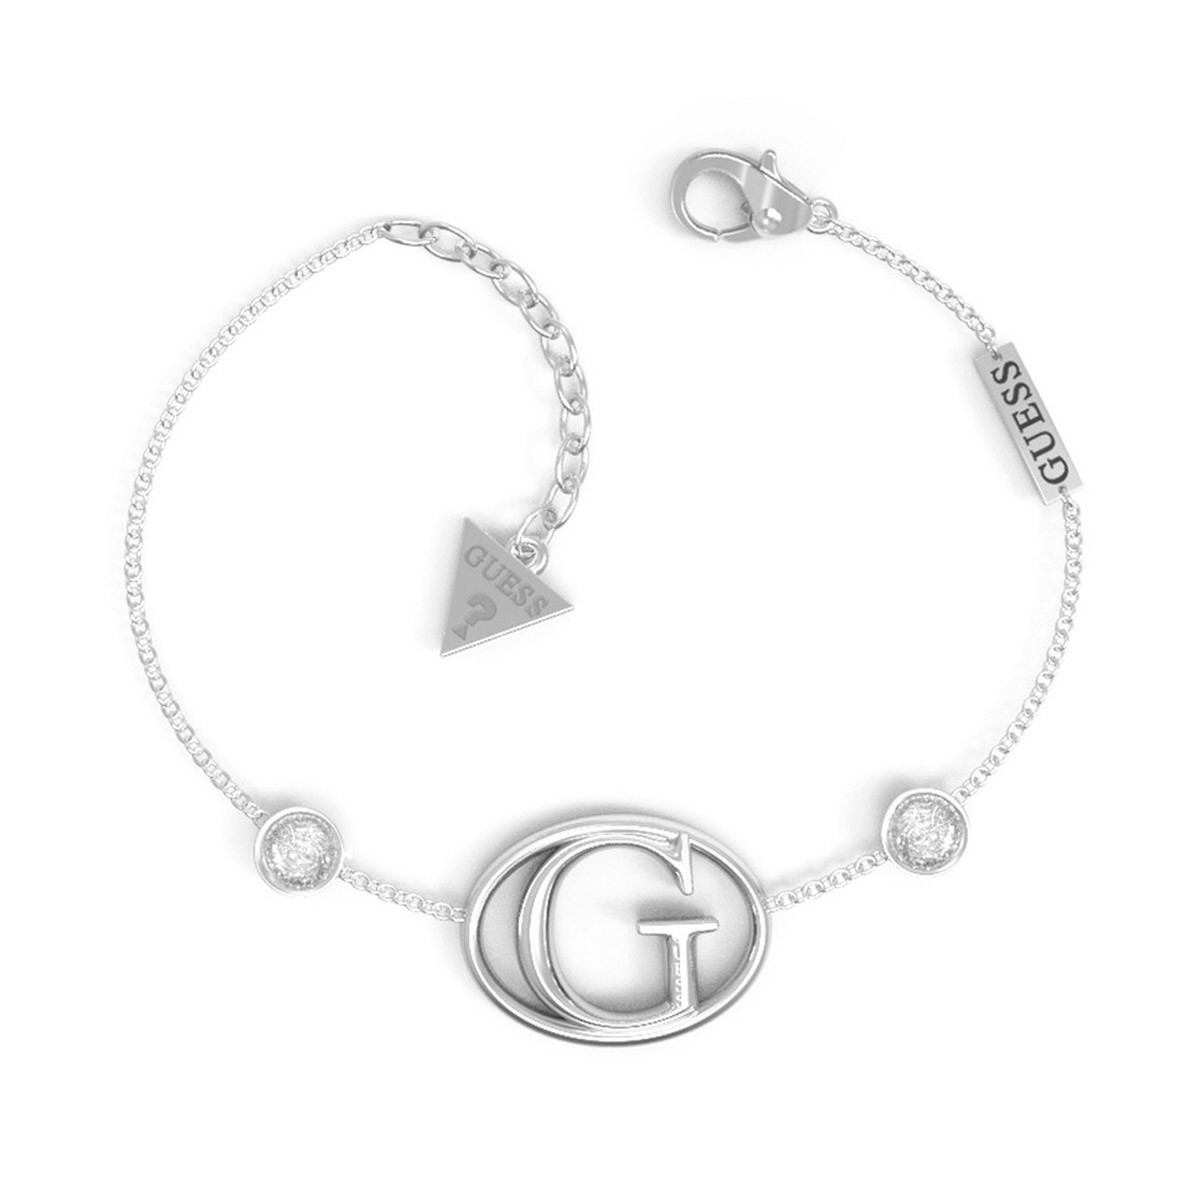 ICONIC GUESS JEWELLERY